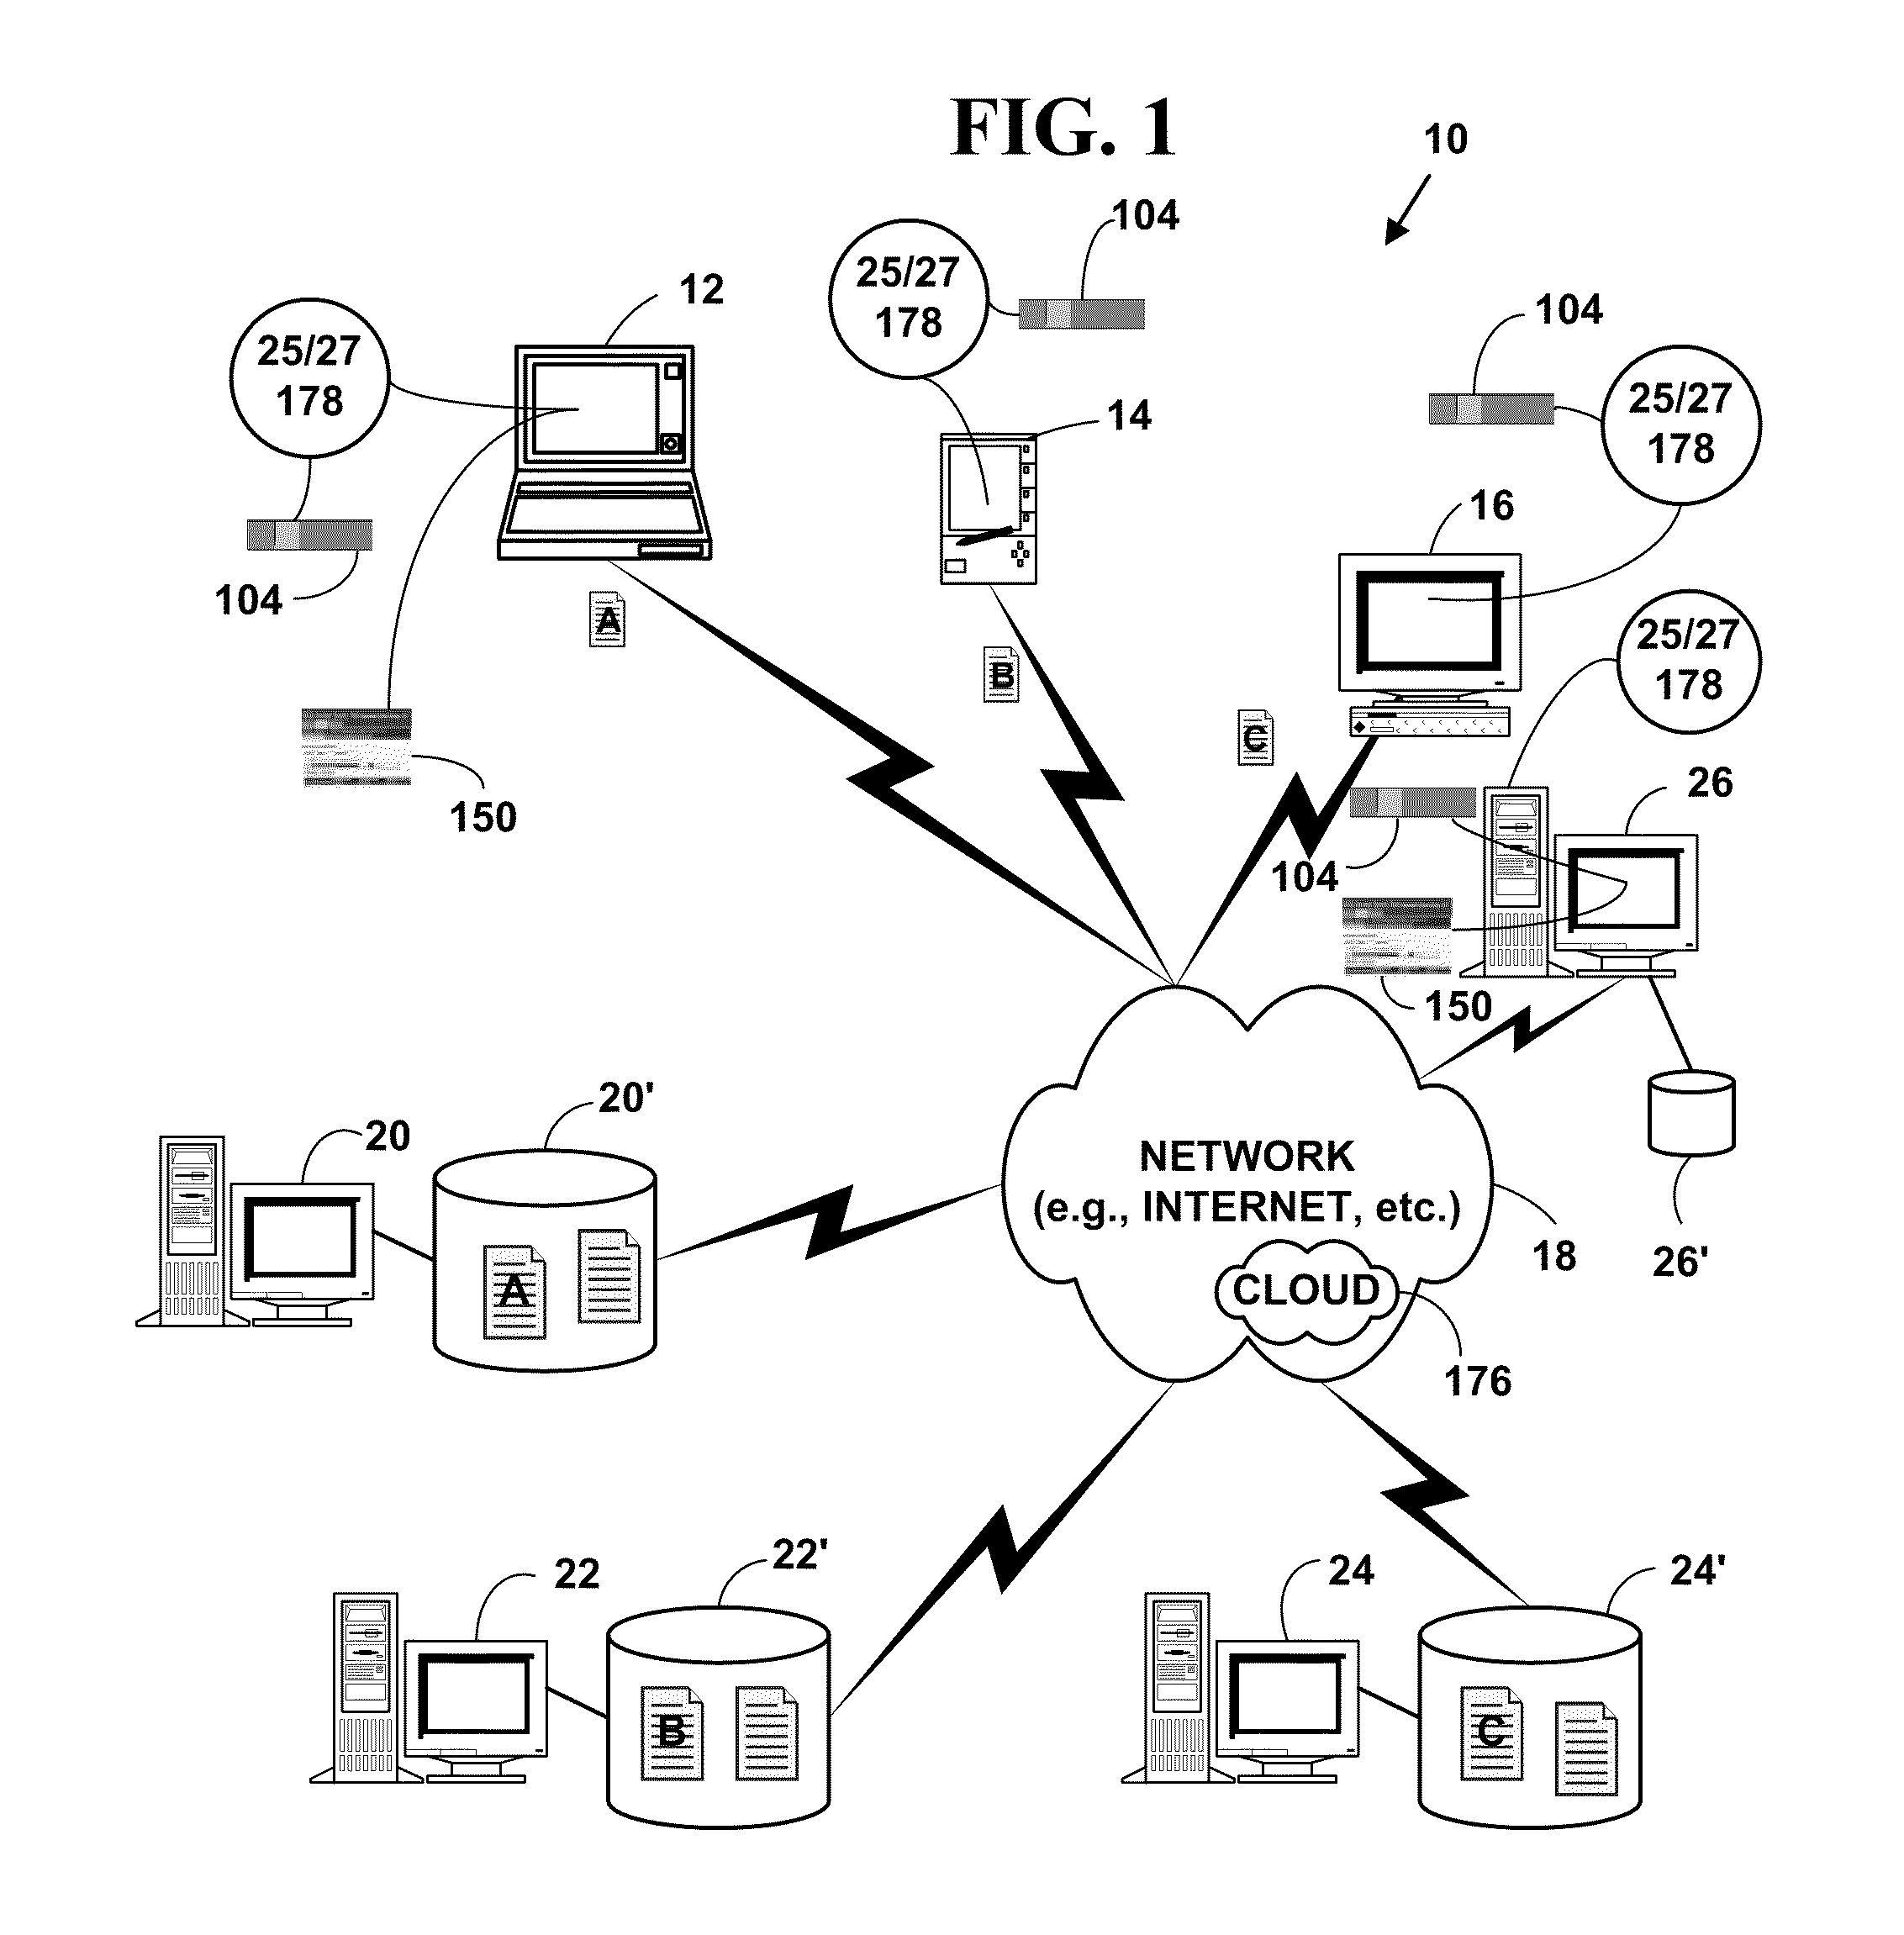 Method and system for providing multi-market electronic trading with cloud computing